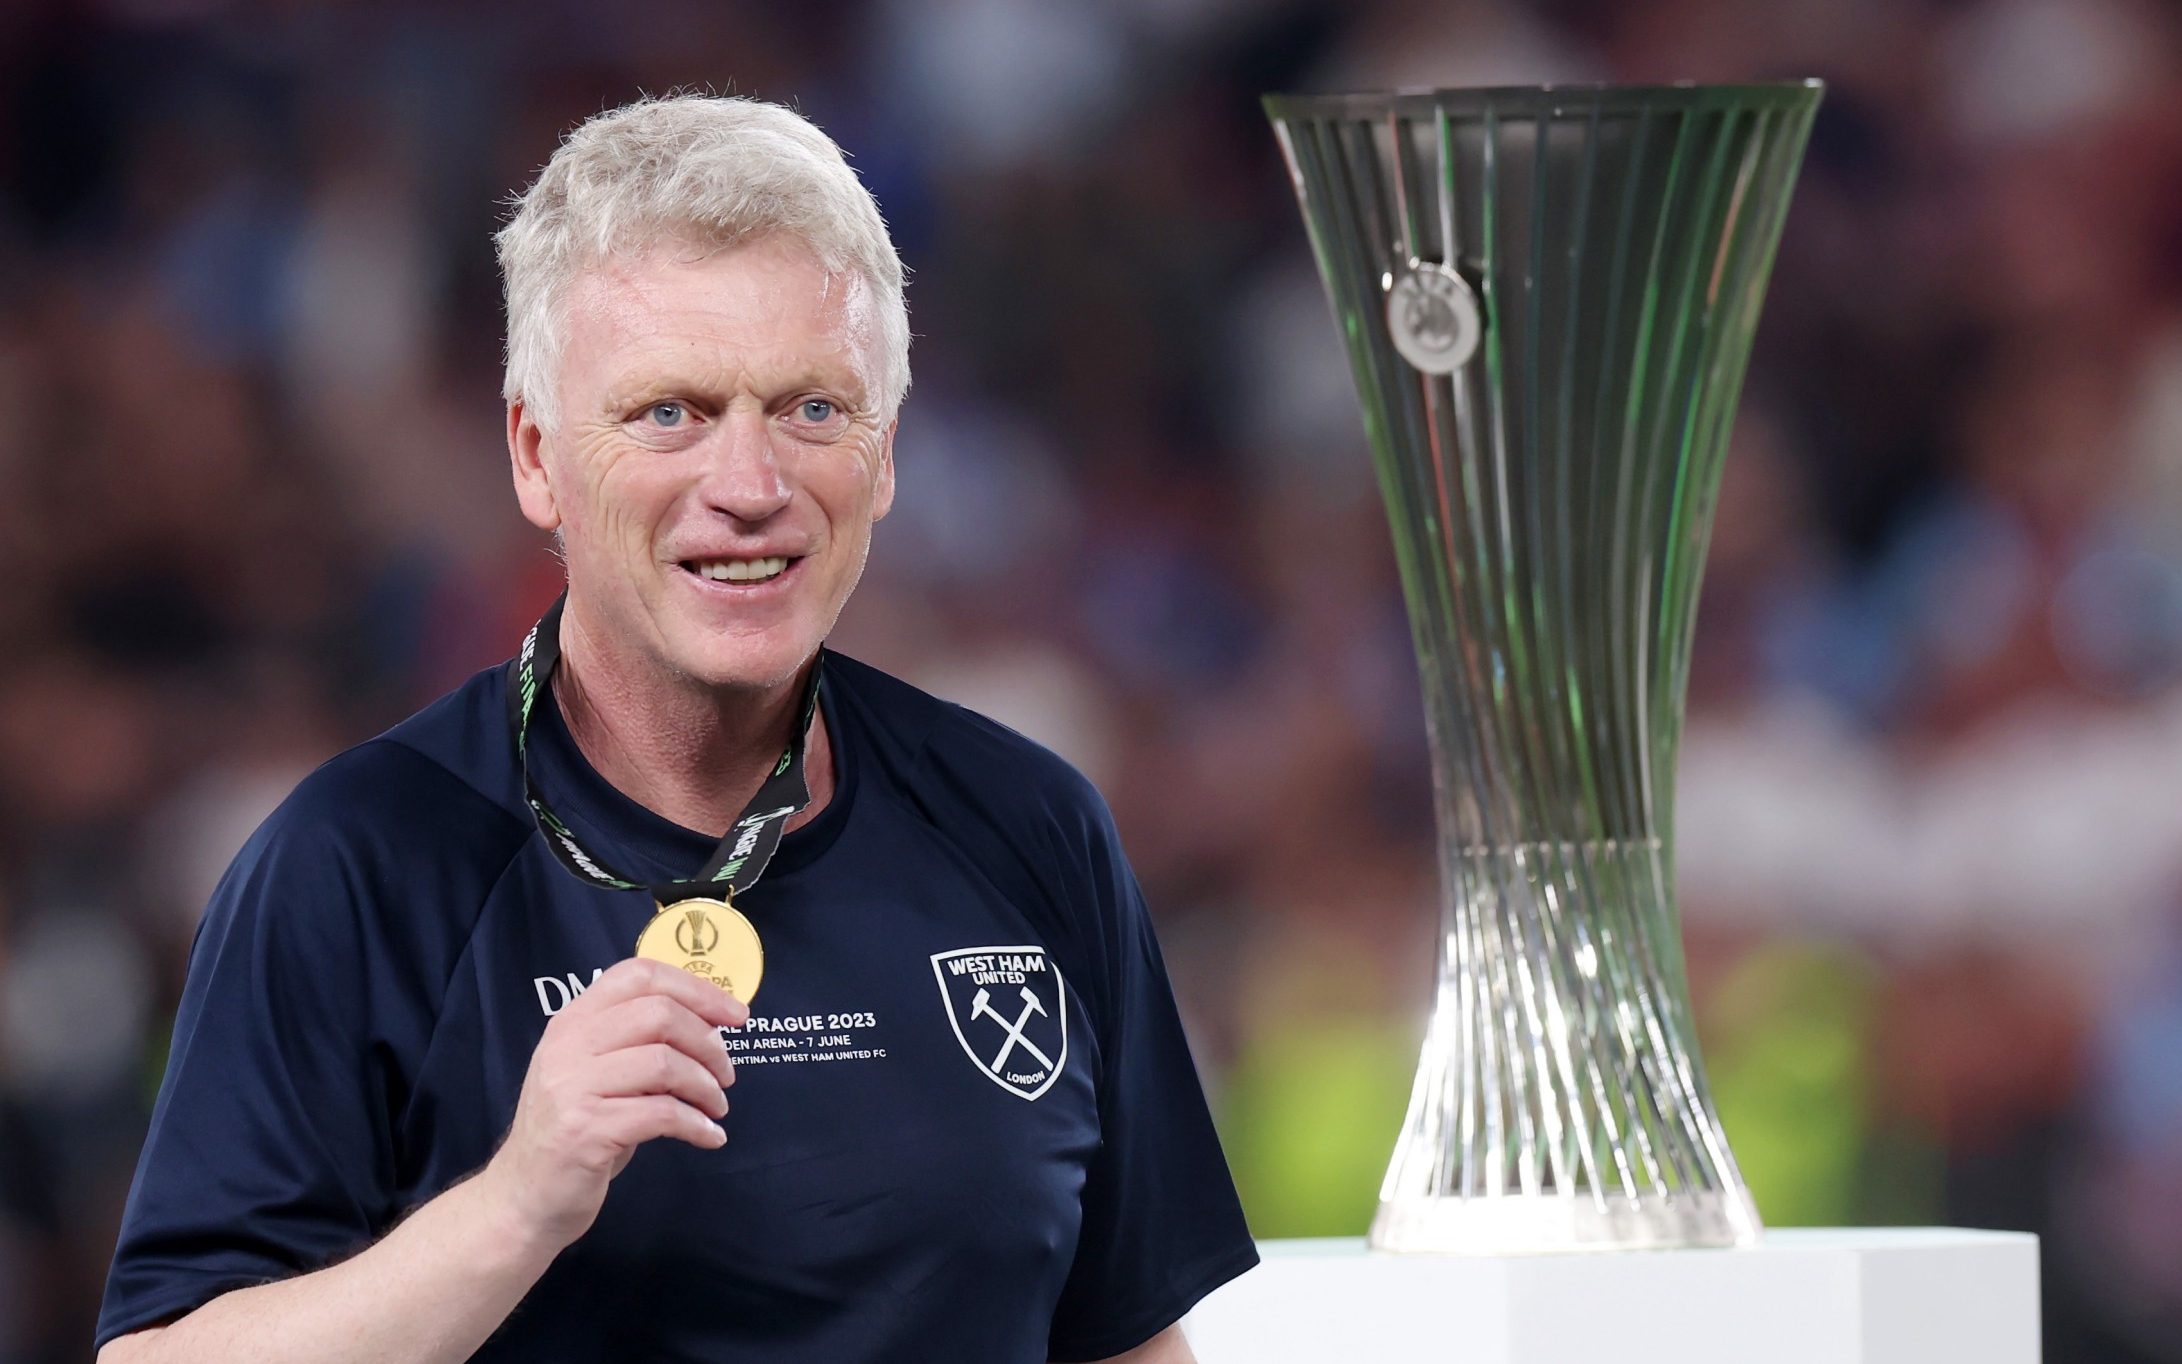 david moyes and west ham are in an uneasy marriage – can either do better?